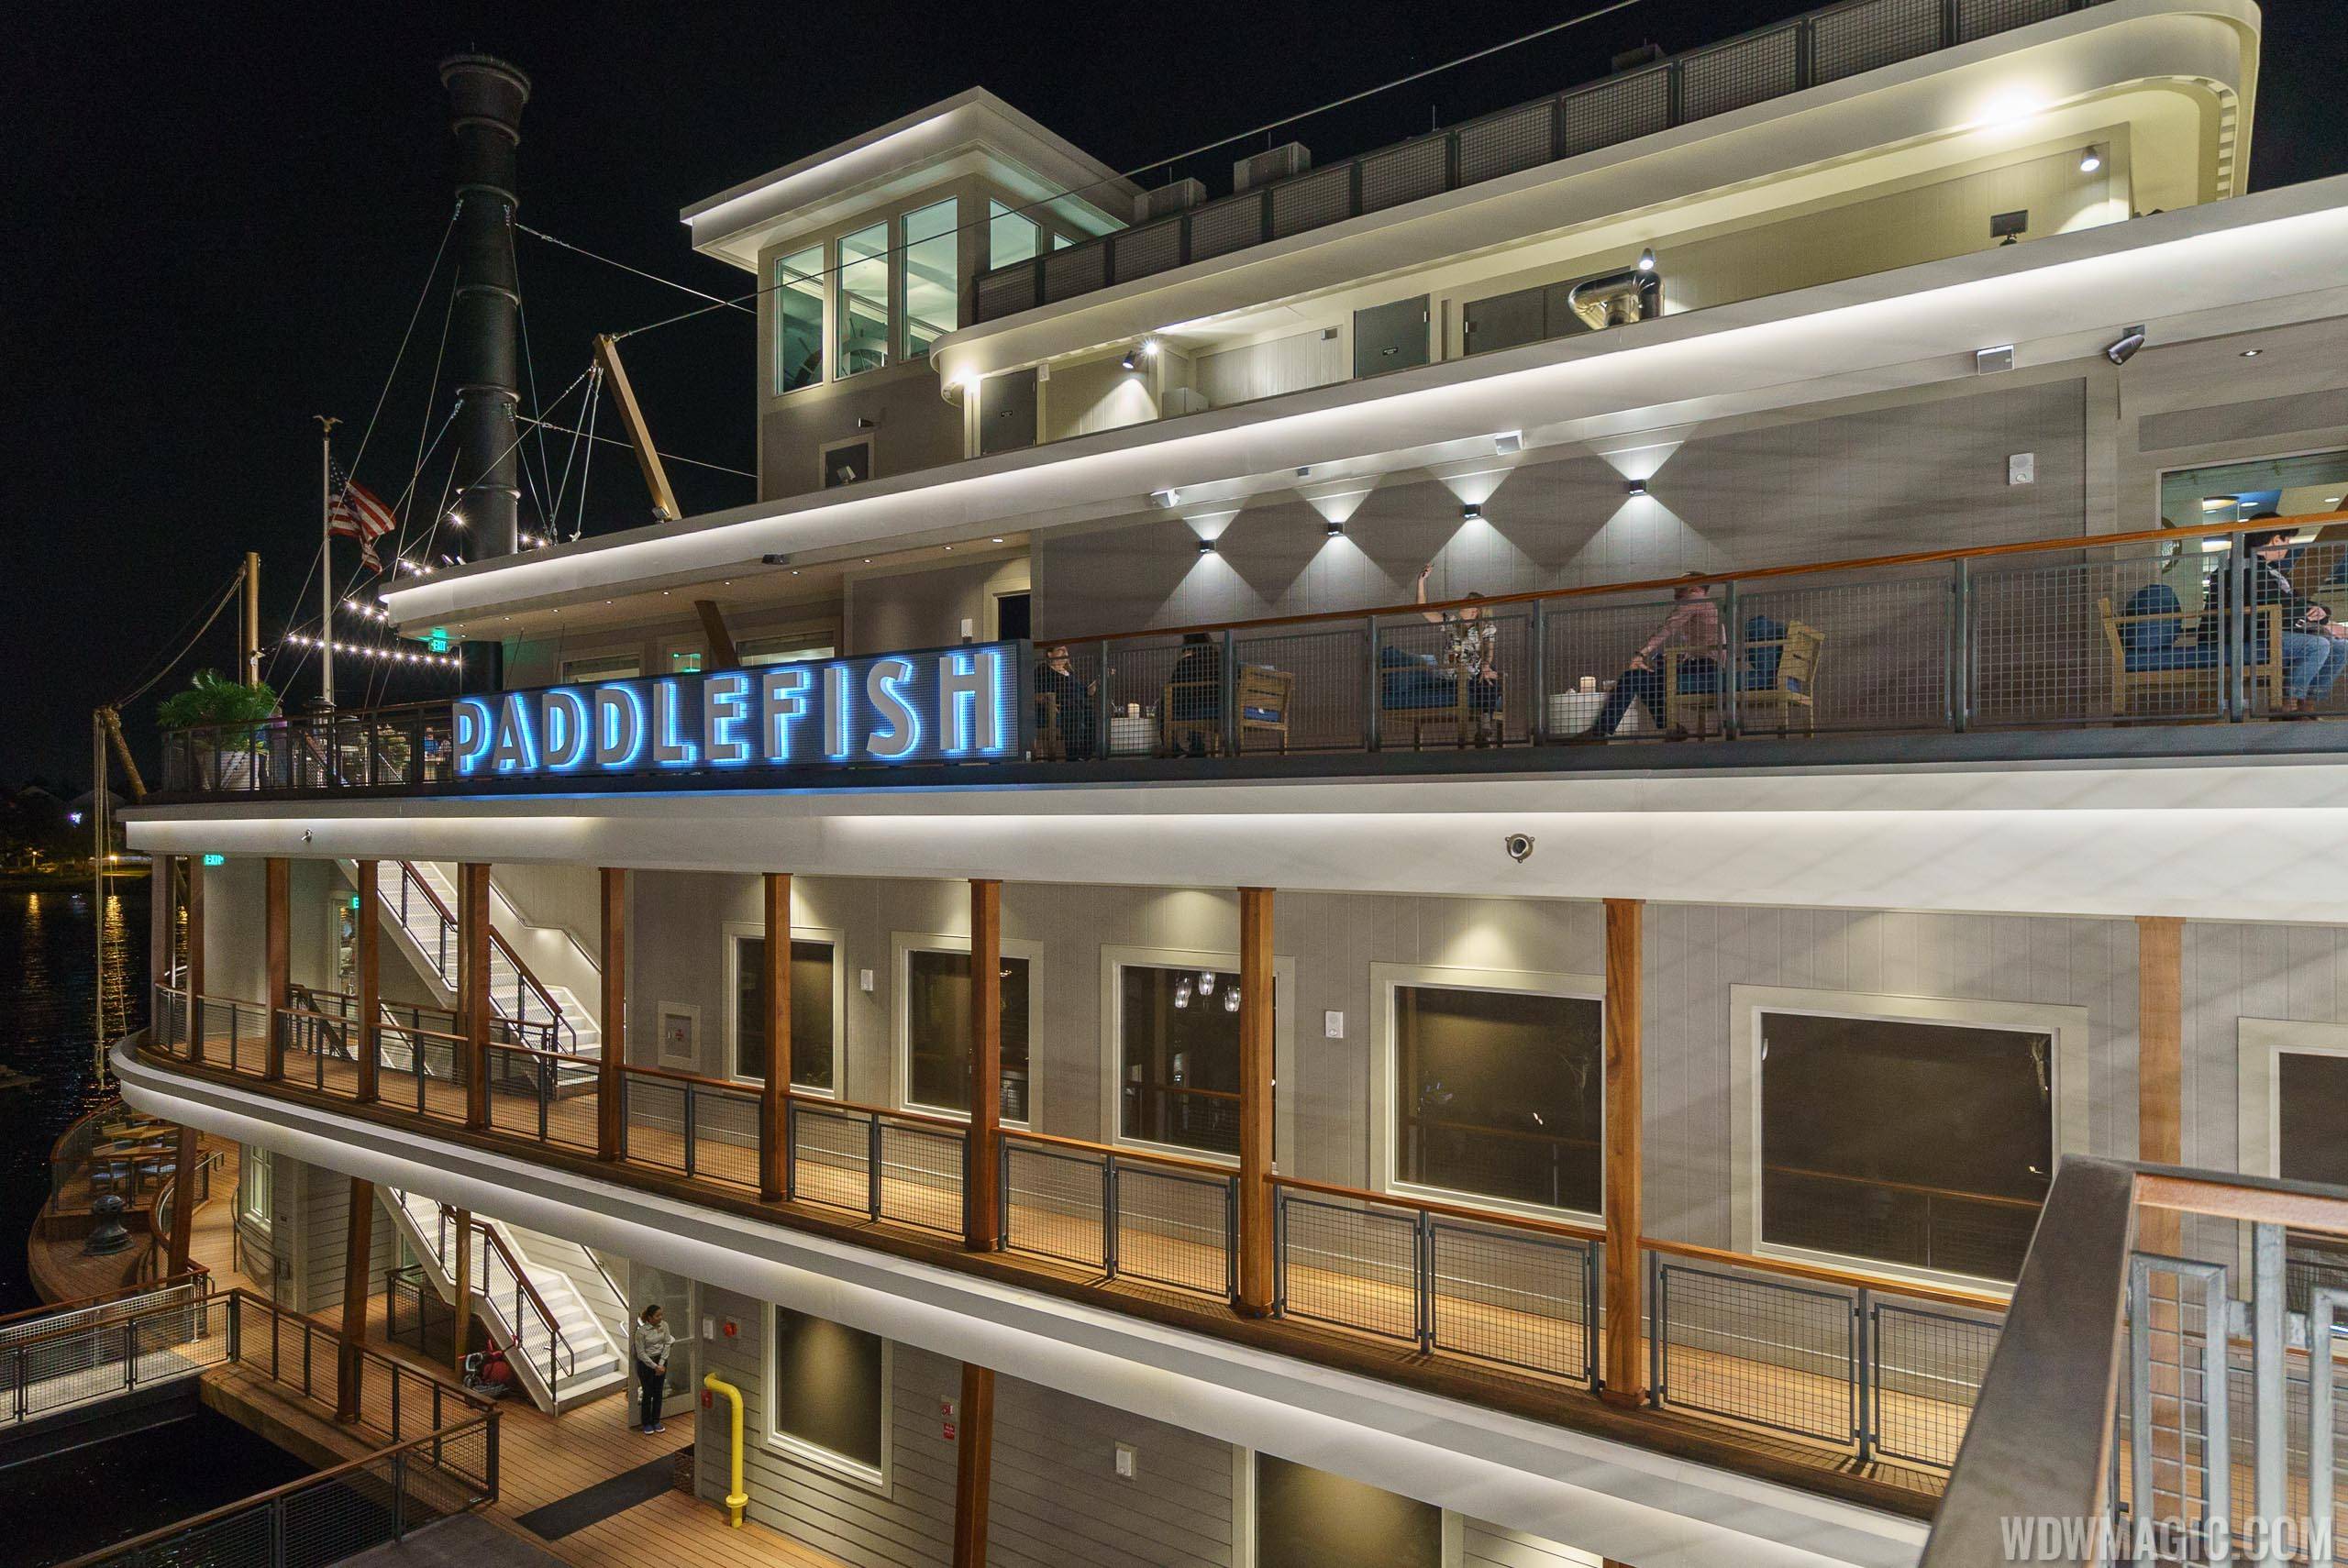 Paddlefish is taking part in the 2020 Magical Dining